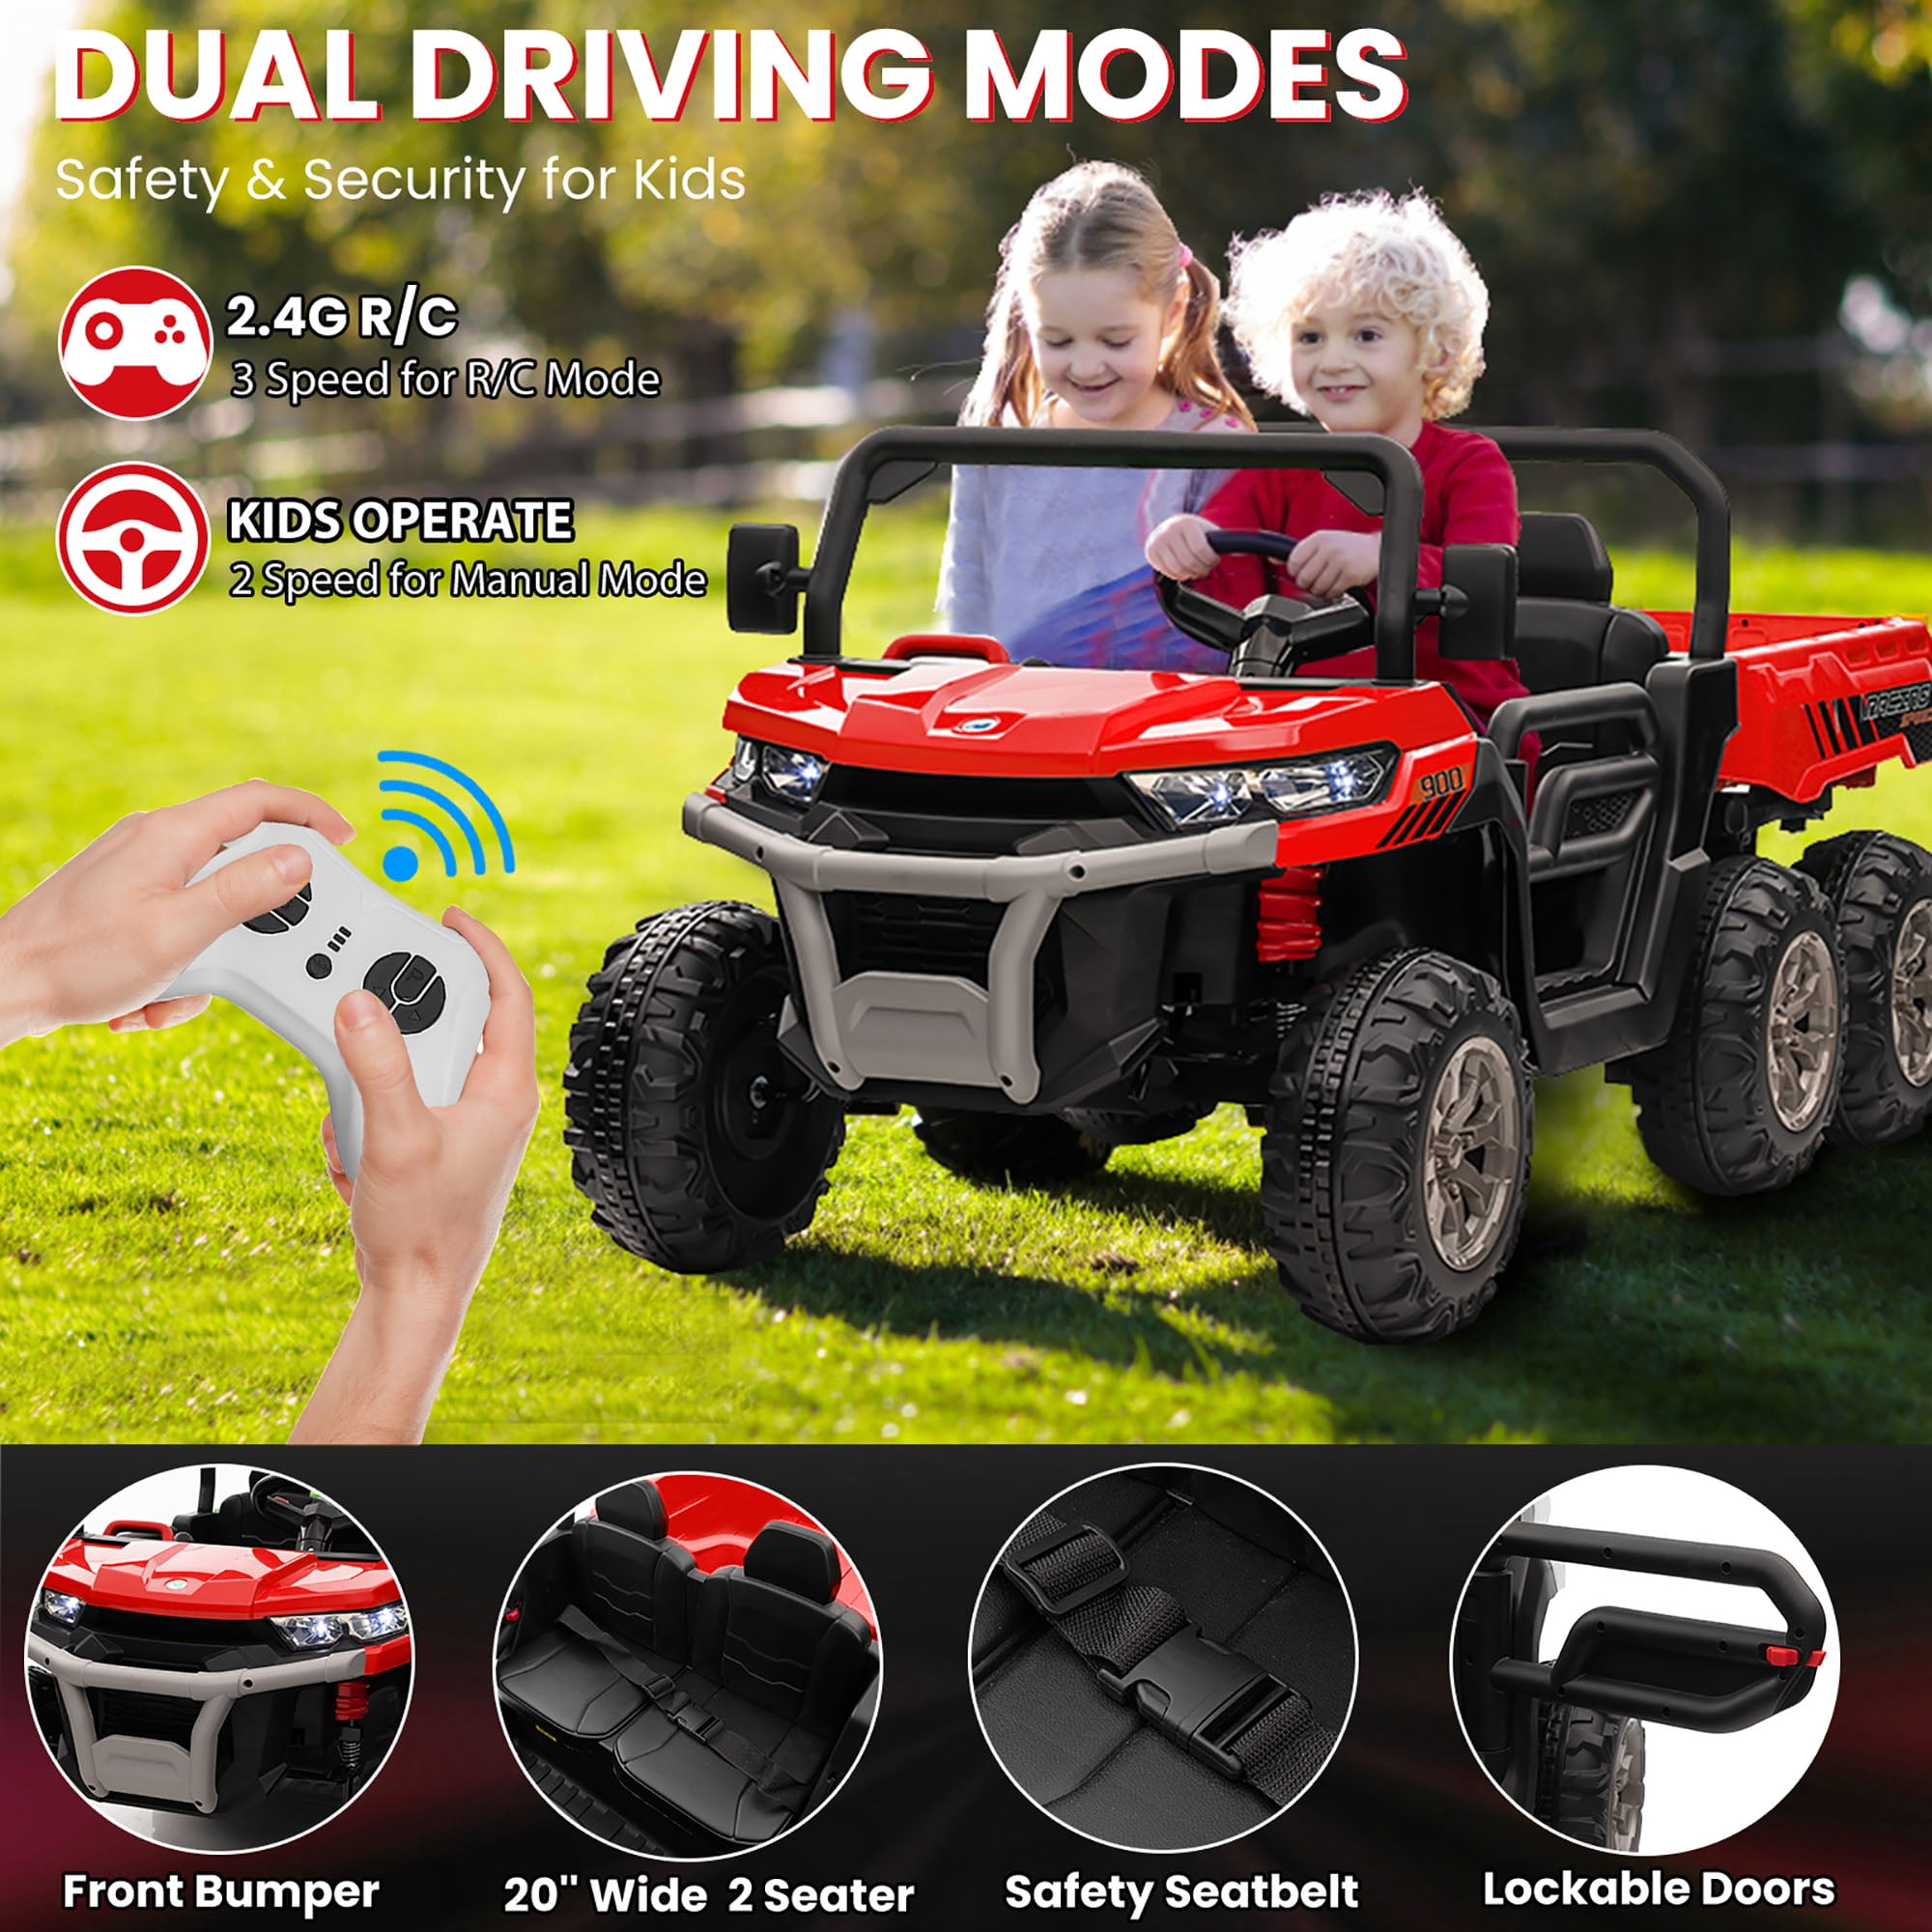 Joyracer 4x4 24V Ride on Dump Truck with Remote Control, Electric Powered 6-Wheel UTV Car, 2 Seater Kids Ride on Toys w/ Tipping Bucket Trailer, Shovel, Spring Suspension, Bluetooth Music, Red